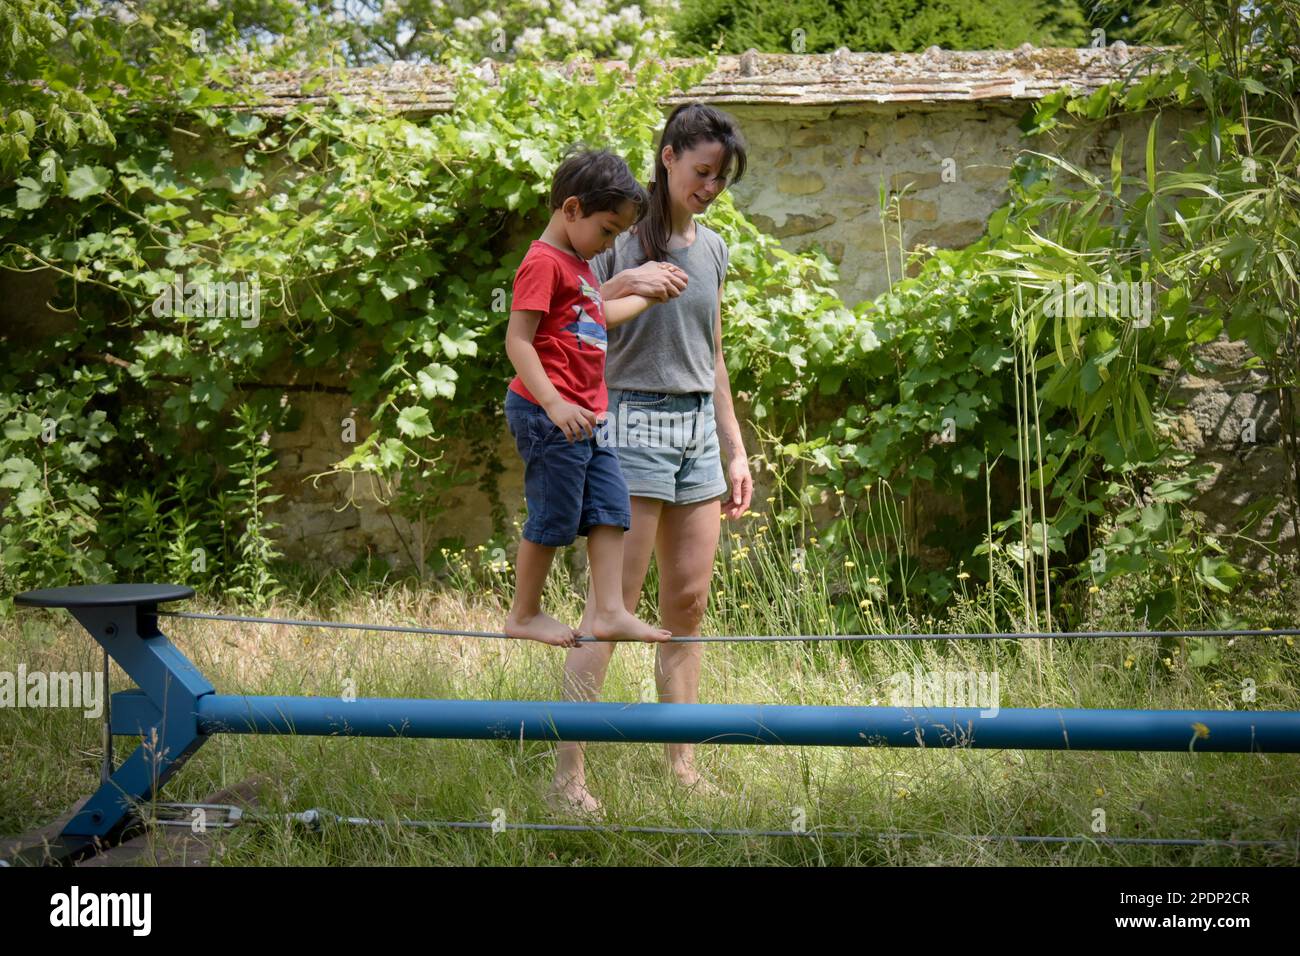 young boy walking on a wire with the help of a woman coach in a garden Stock Photo